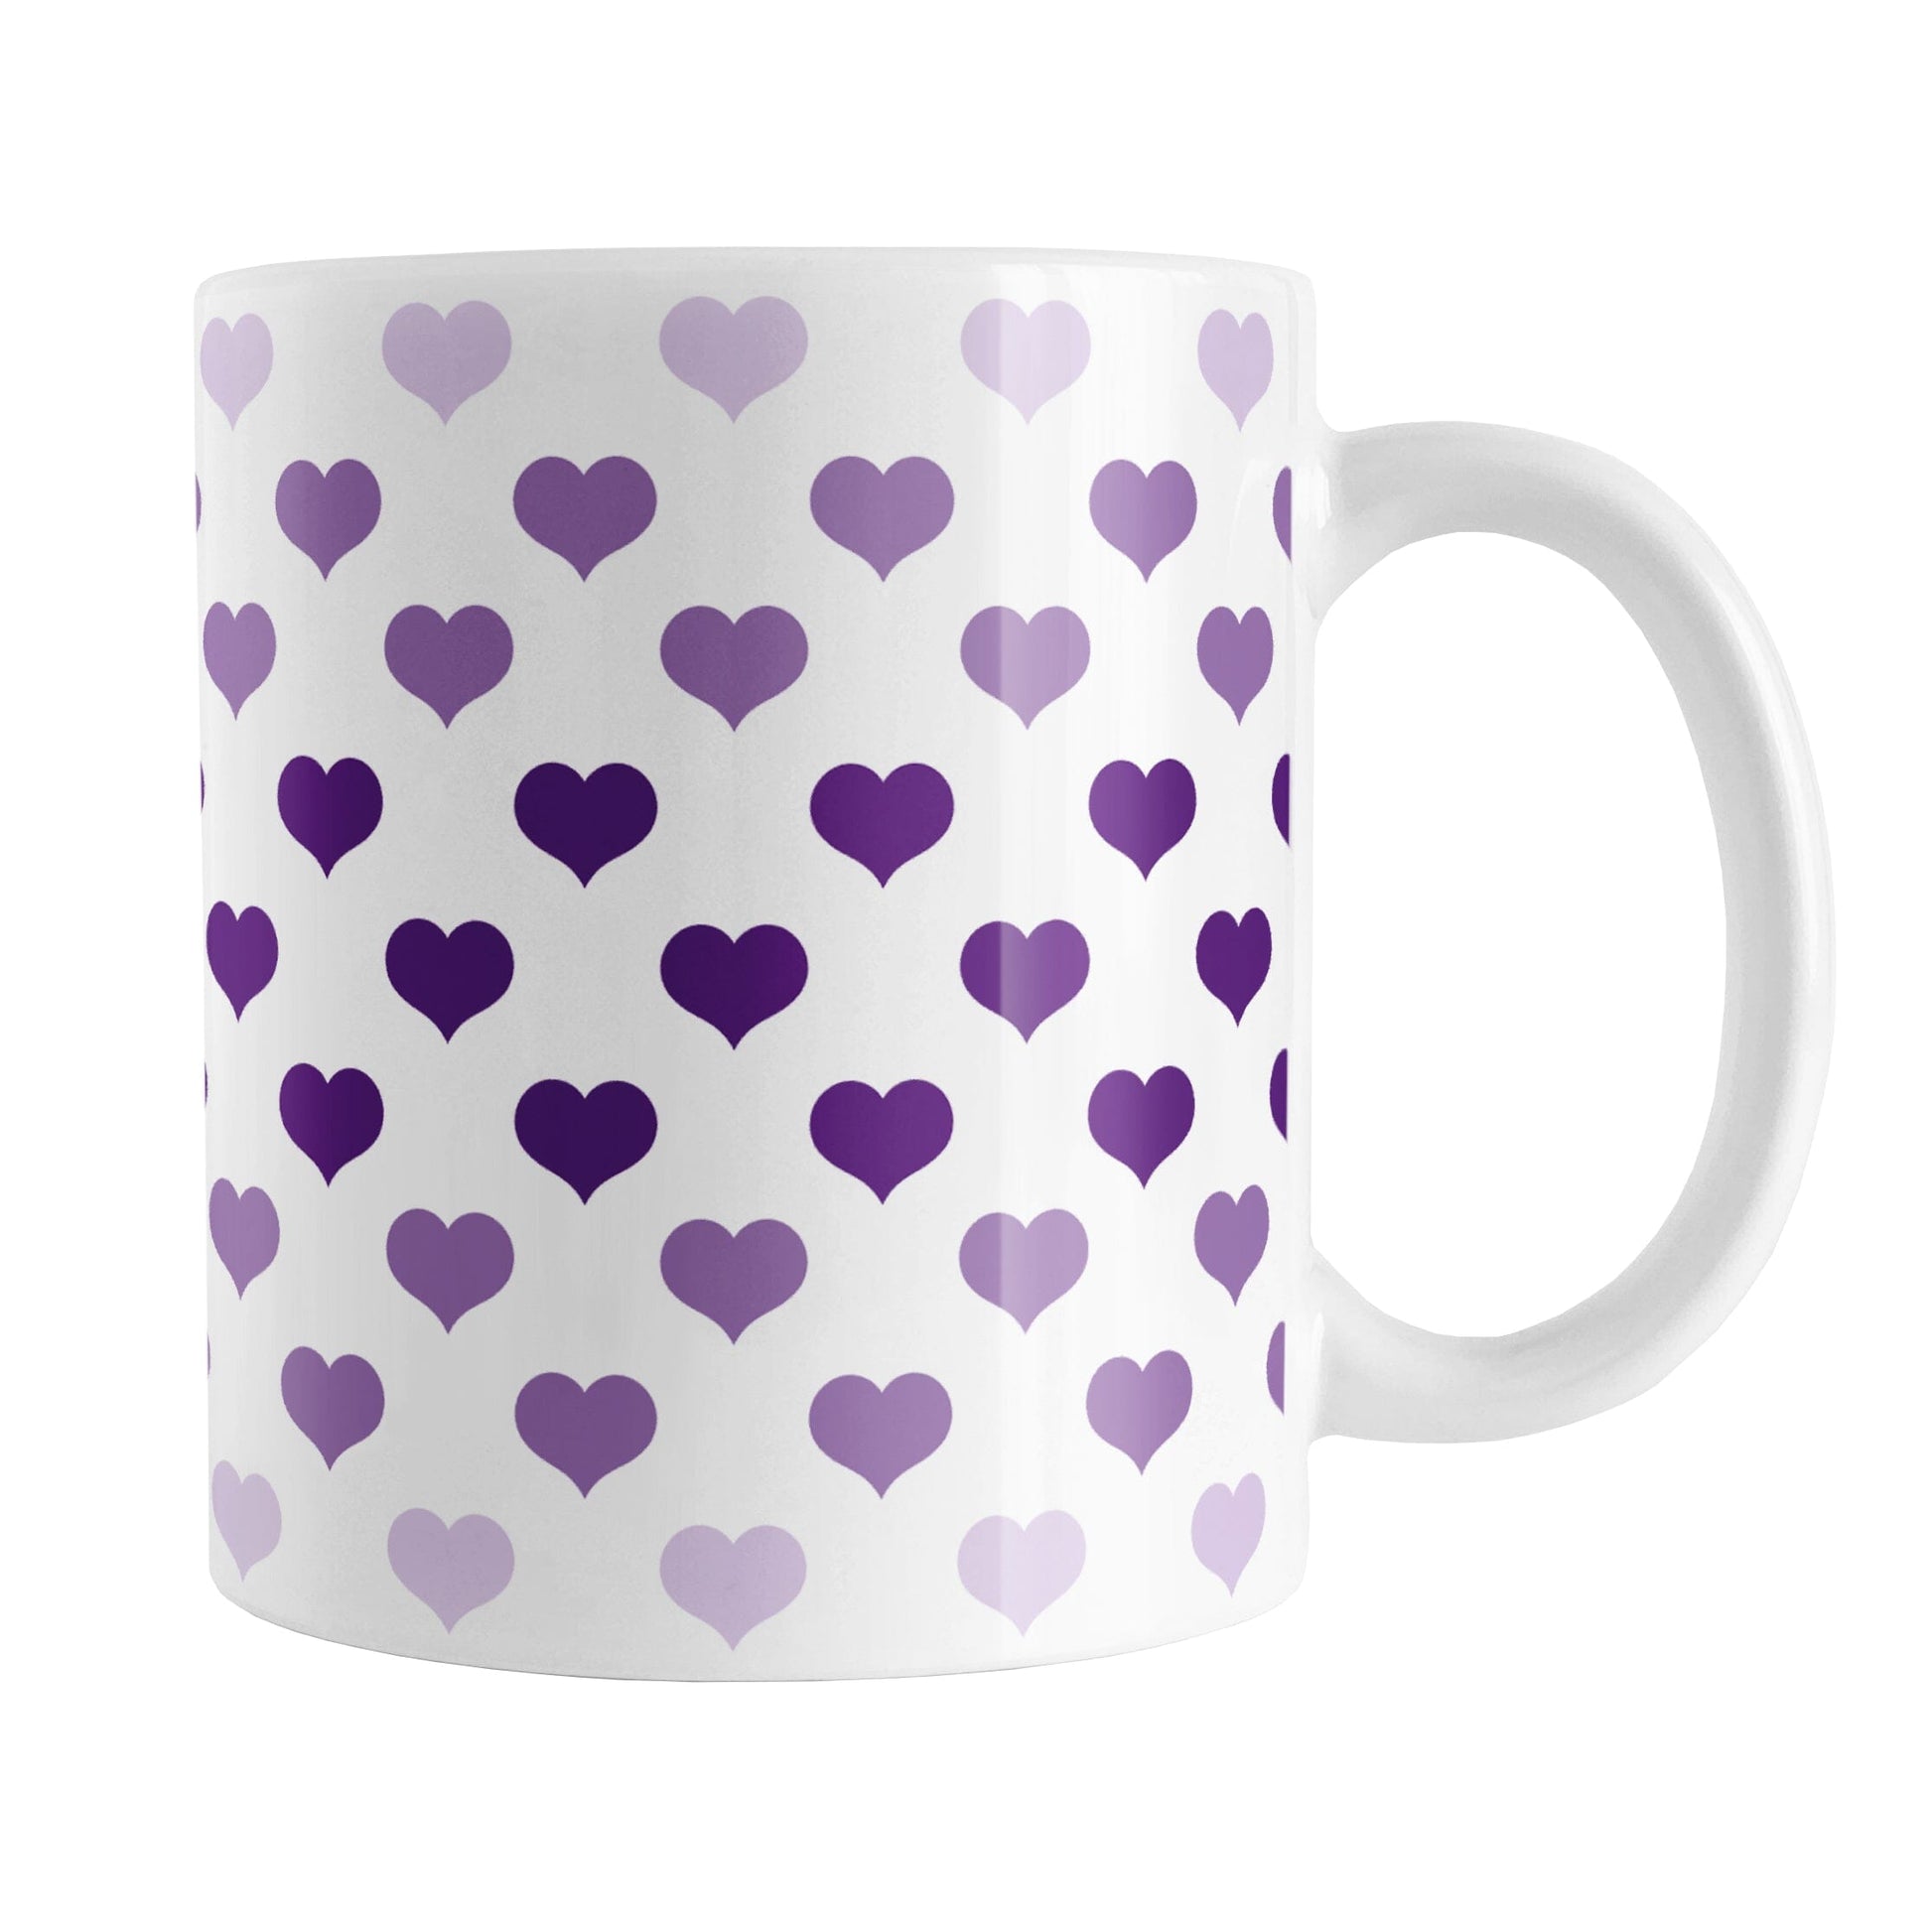 Hearts in Purple Mug (11oz) at Amy's Coffee Mugs. A ceramic coffee mug designed with hearts in different shades of purple, with the darker purple color across the middle and the lighter purple along the top and bottom, in a pattern that wraps around the mug to the handle.